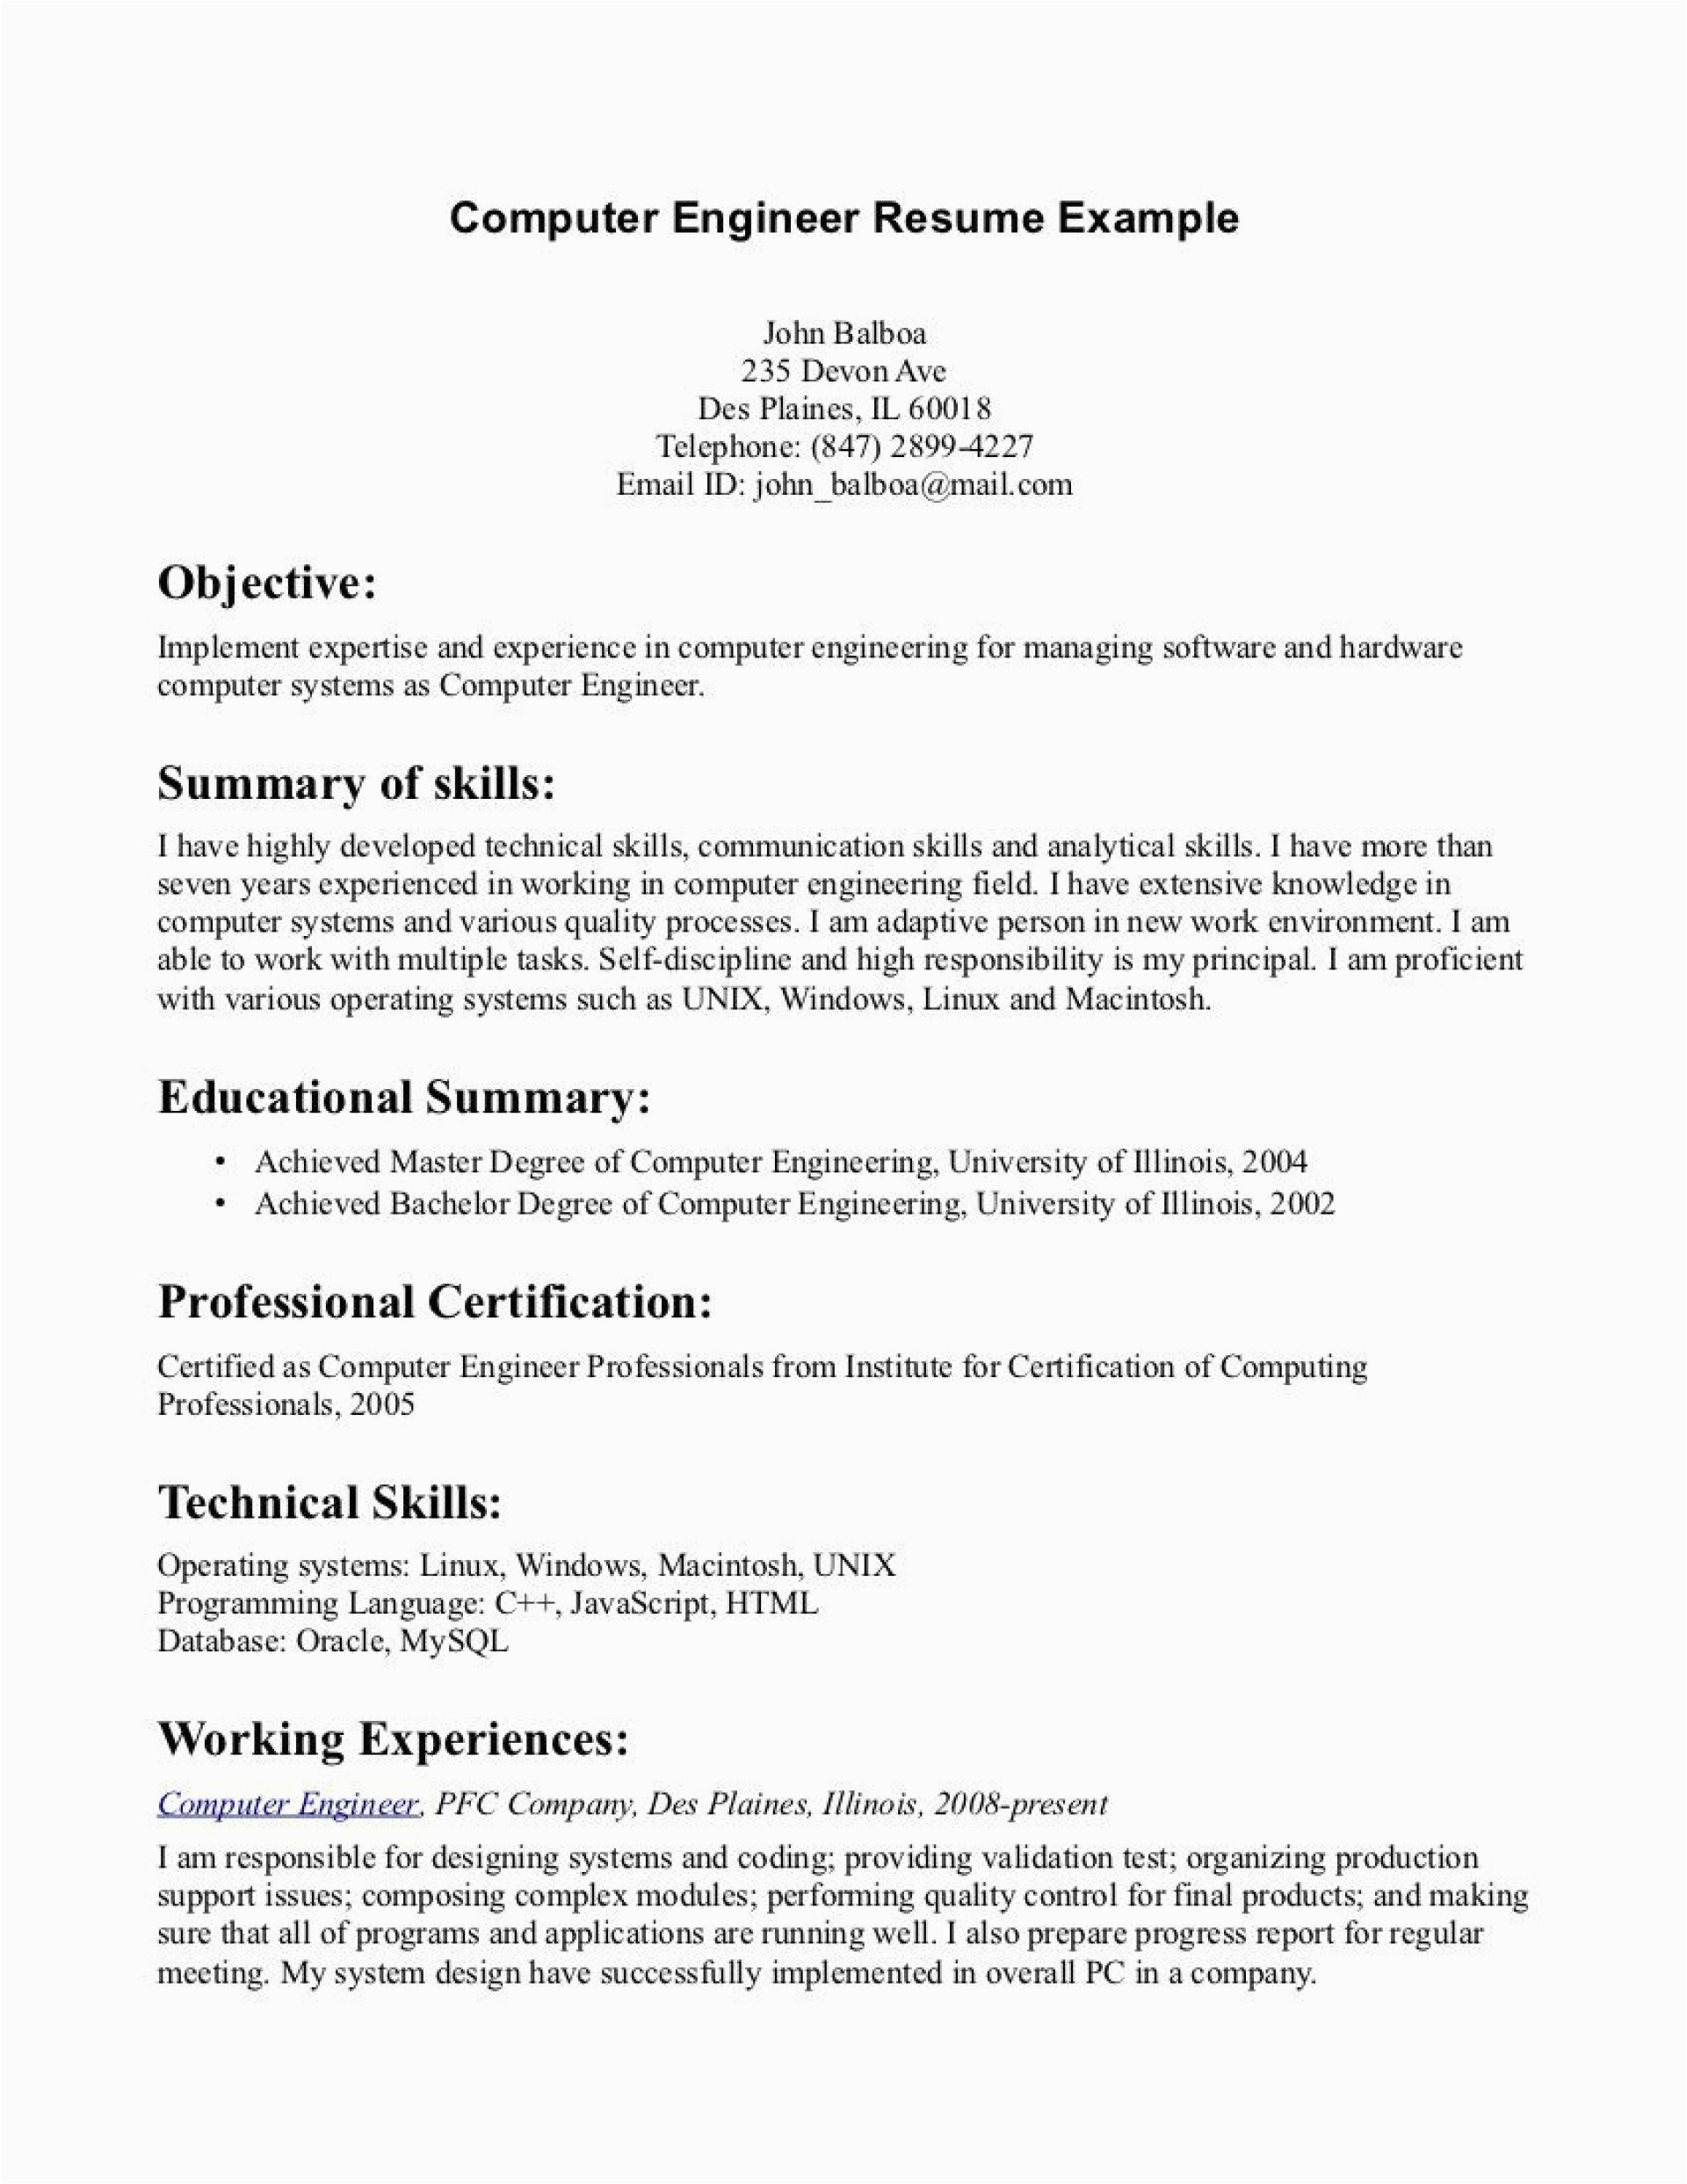 Samples Of A Objective for Resumes Resume Objective Example for Teaching Position Addictionary